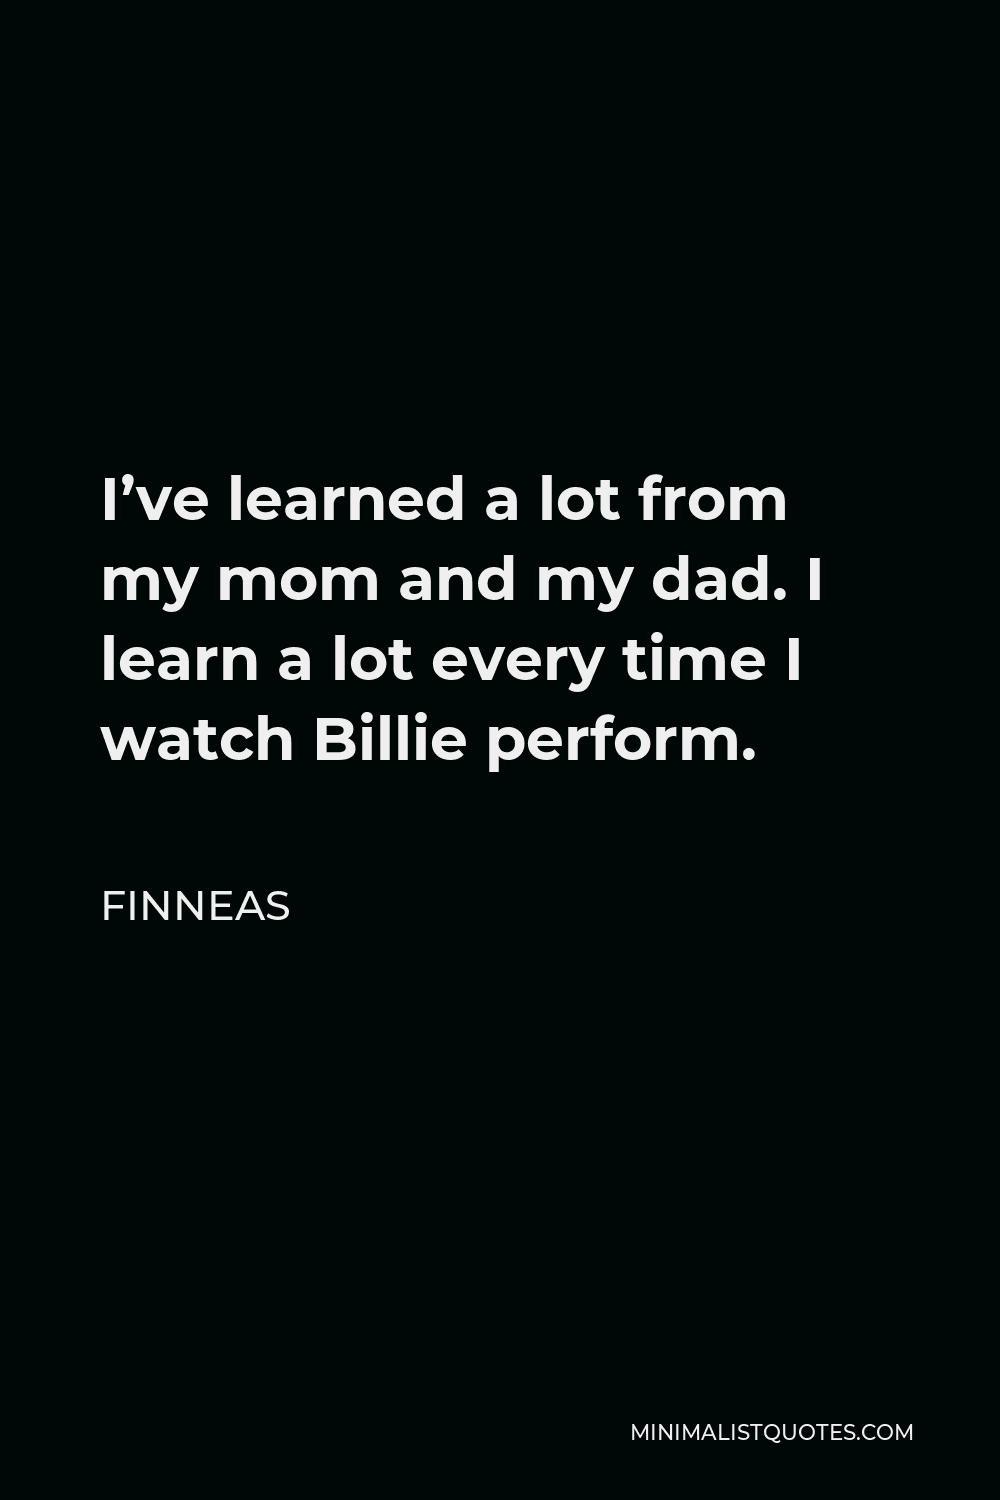 Finneas Quote - I’ve learned a lot from my mom and my dad. I learn a lot every time I watch Billie perform.